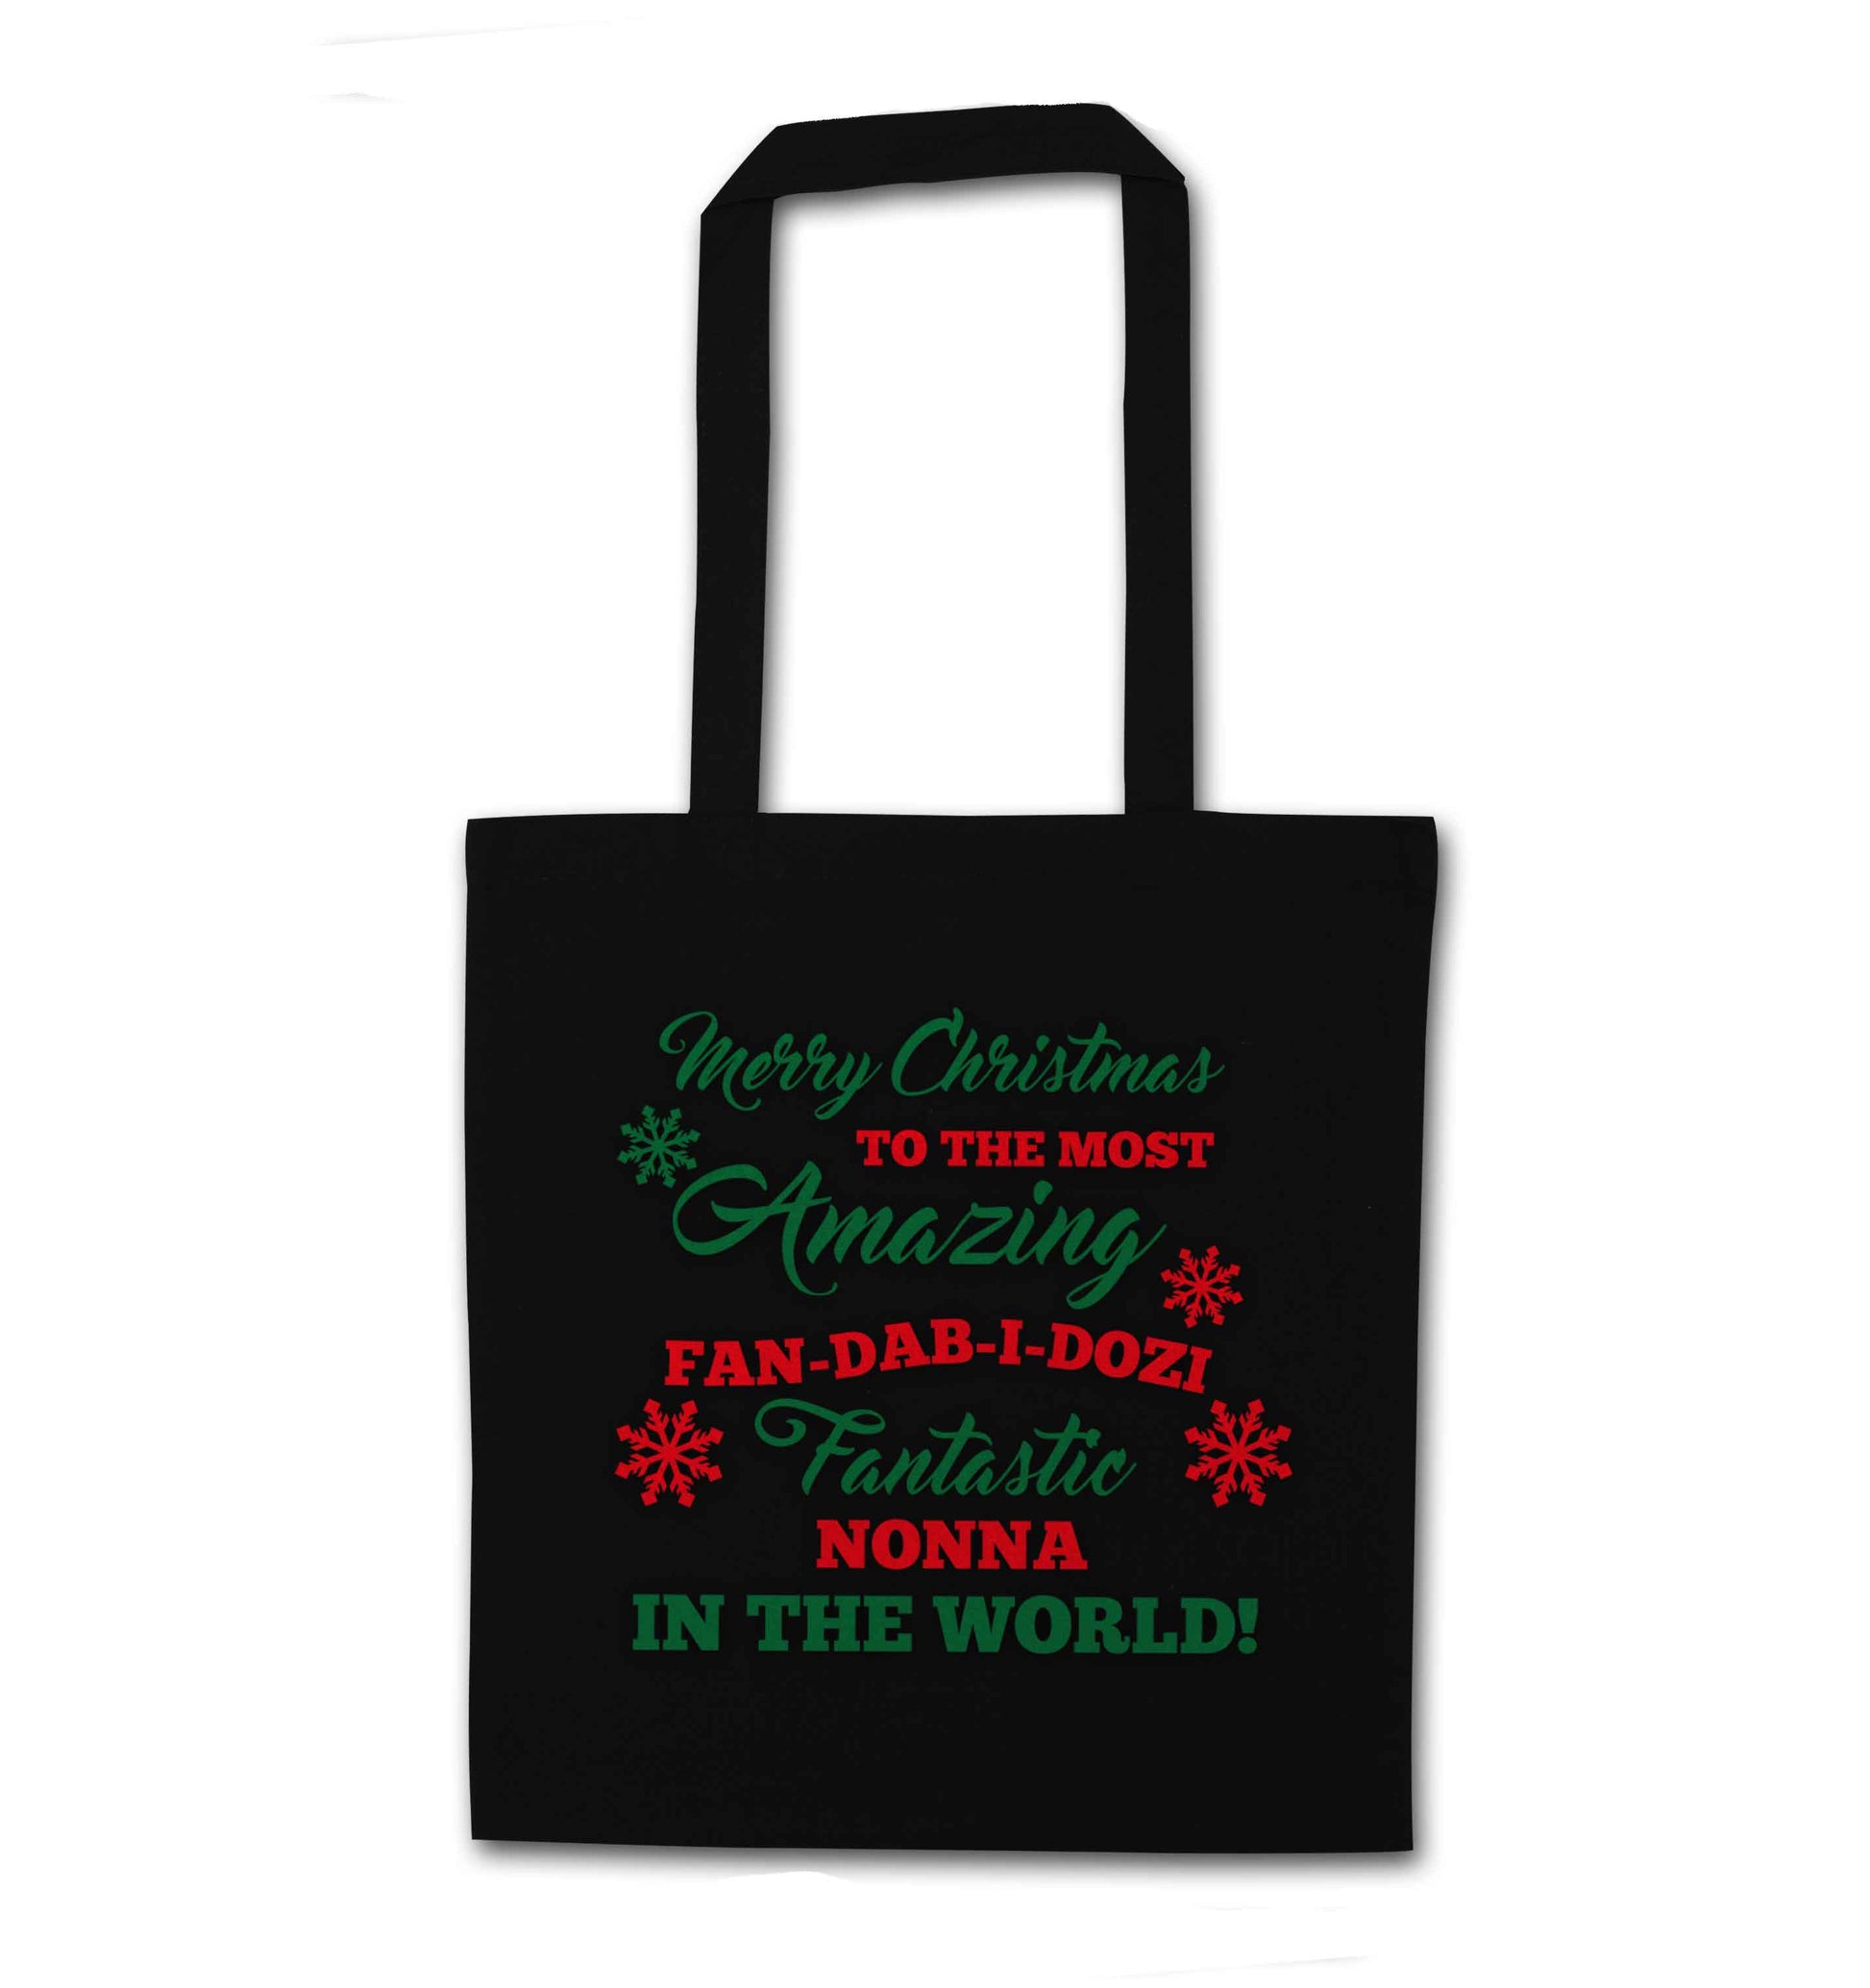 Merry Christmas to the most amazing fan-dab-i-dozi fantasic Nonna in the world black tote bag